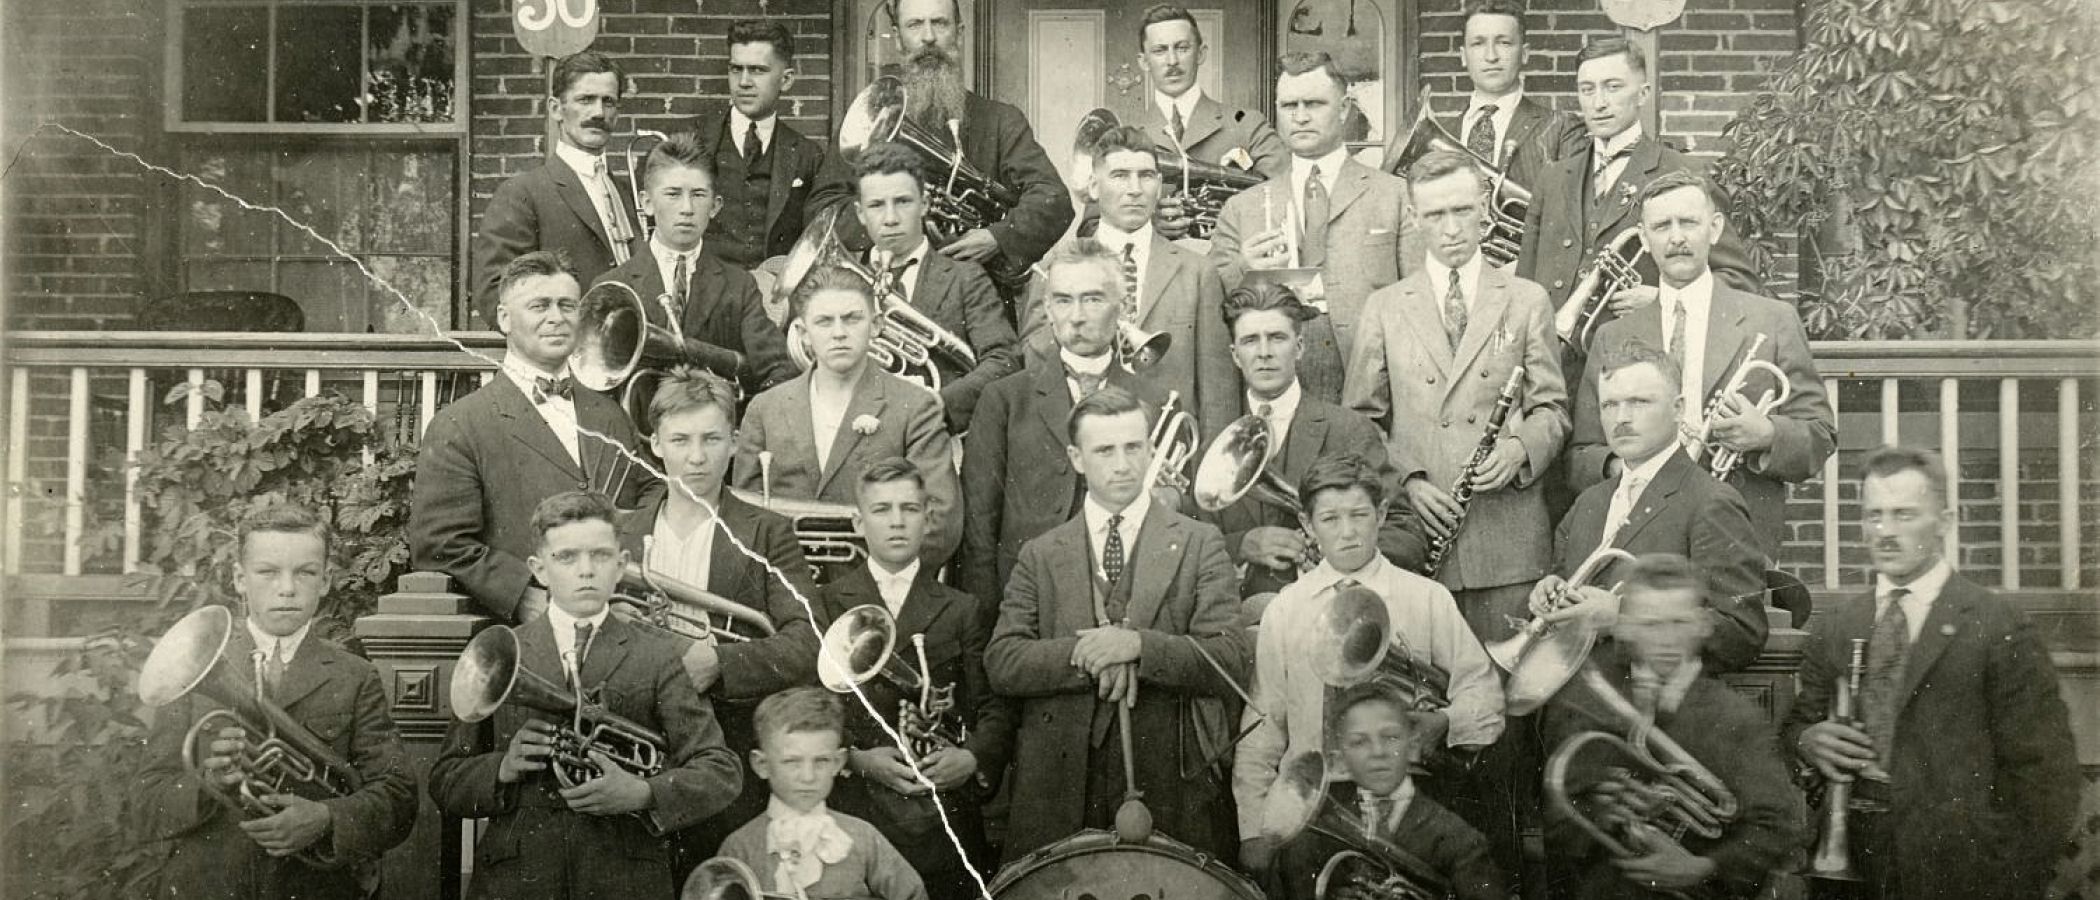 Image of a photograph of The Ville-Marie brass band, circa 1922 